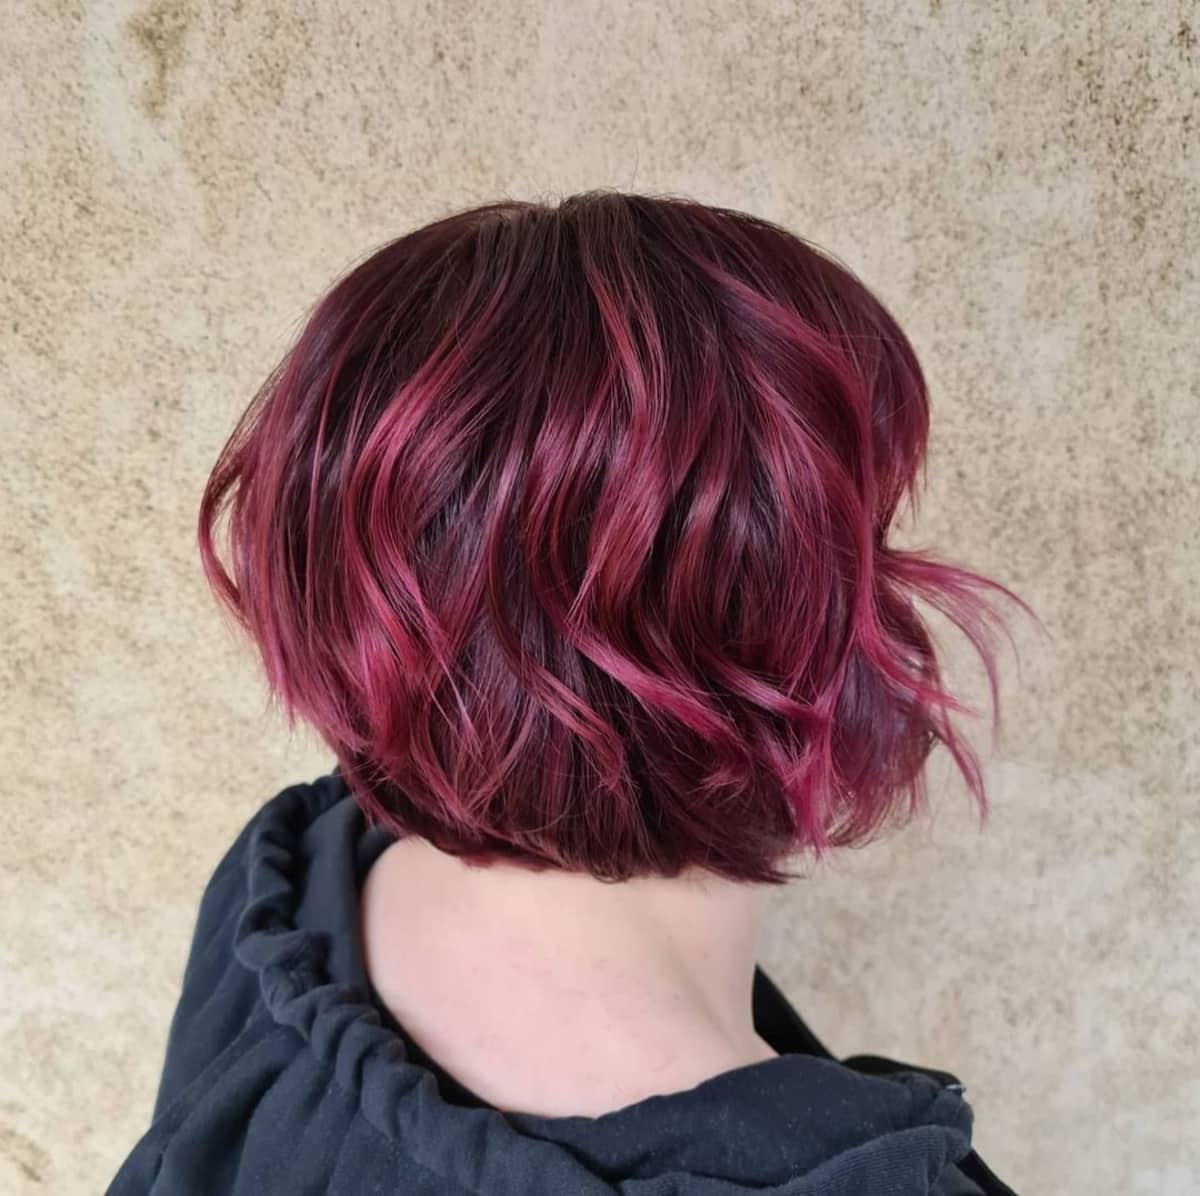 Black shag bob hairstyle with pink highlights